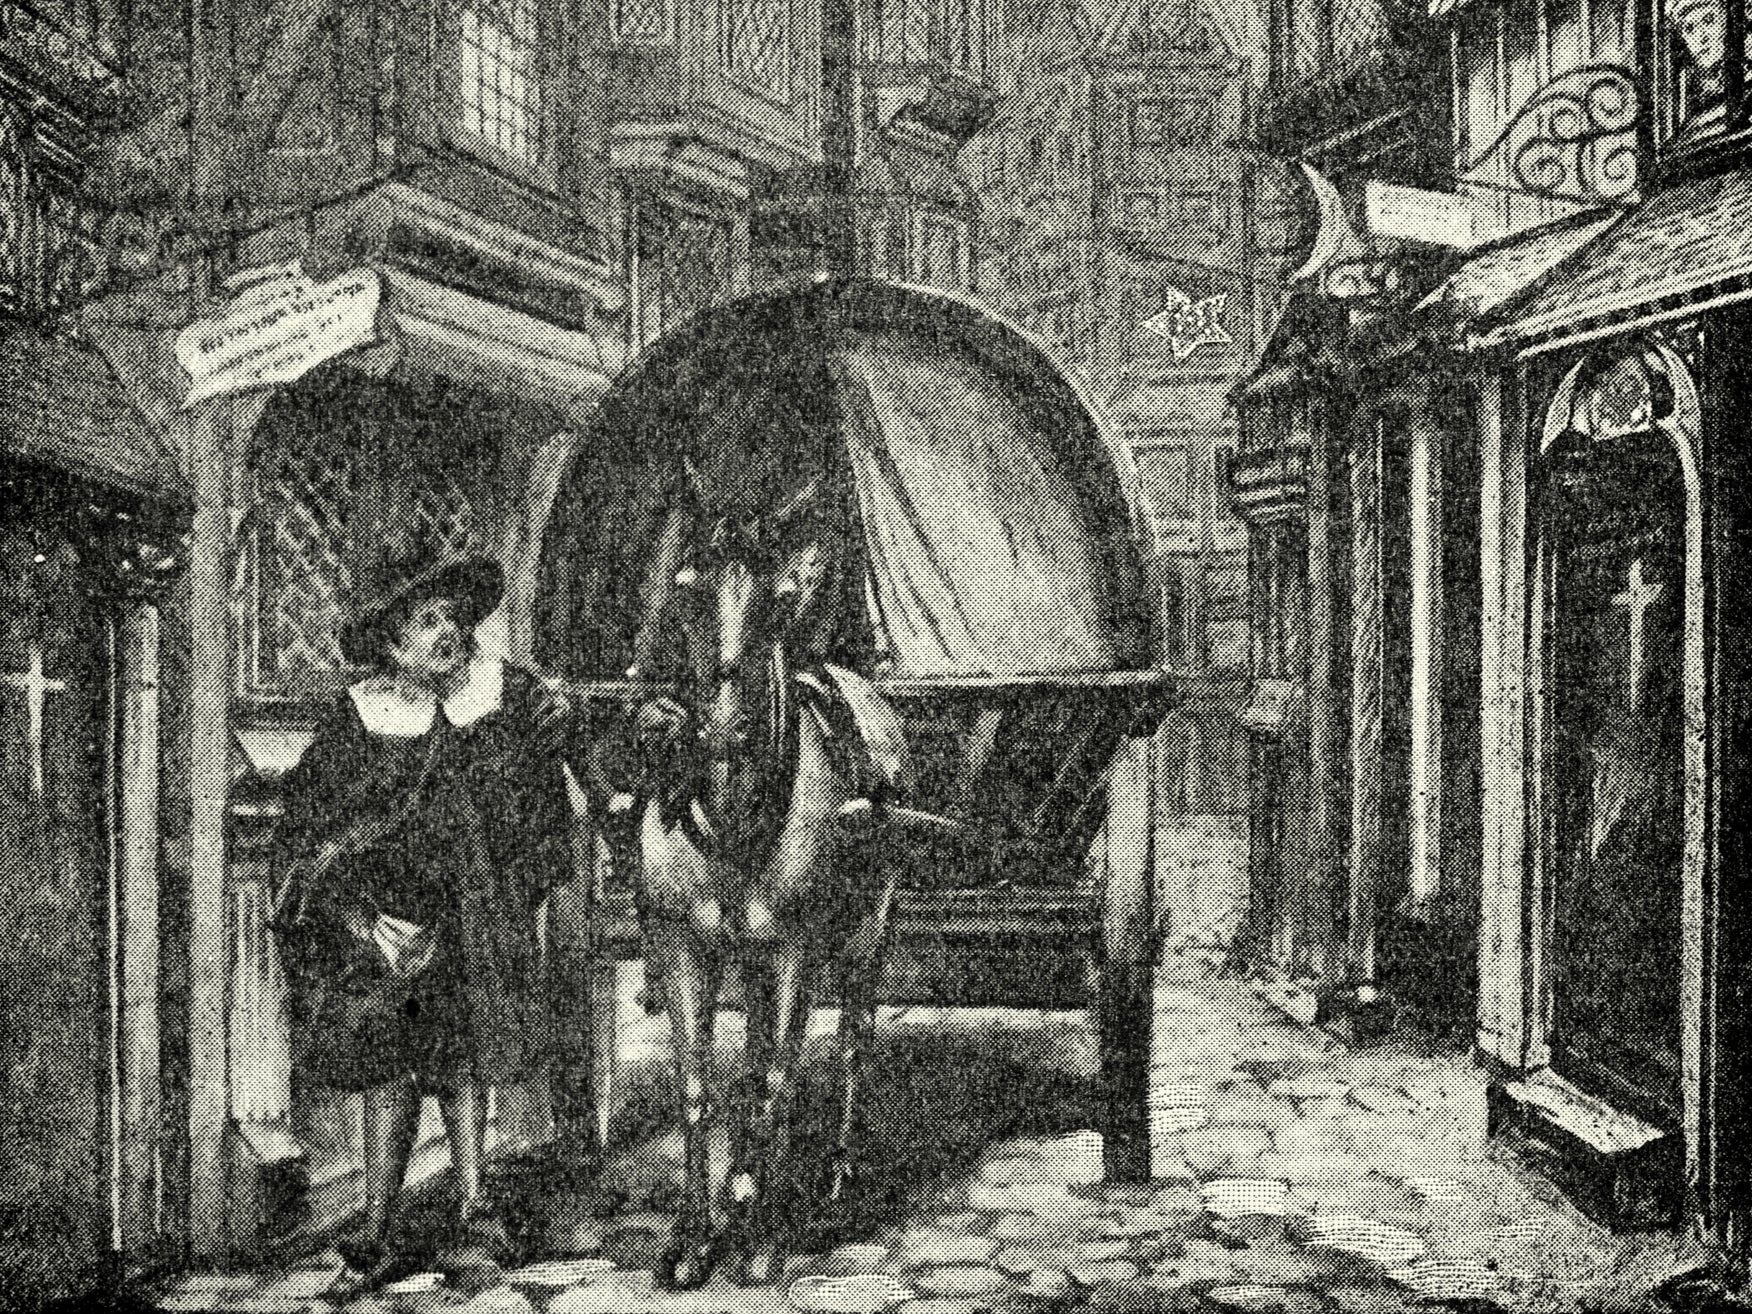 Engraving showing a dead cart being used to collect the bodies of plague victims during the Great Plague of London